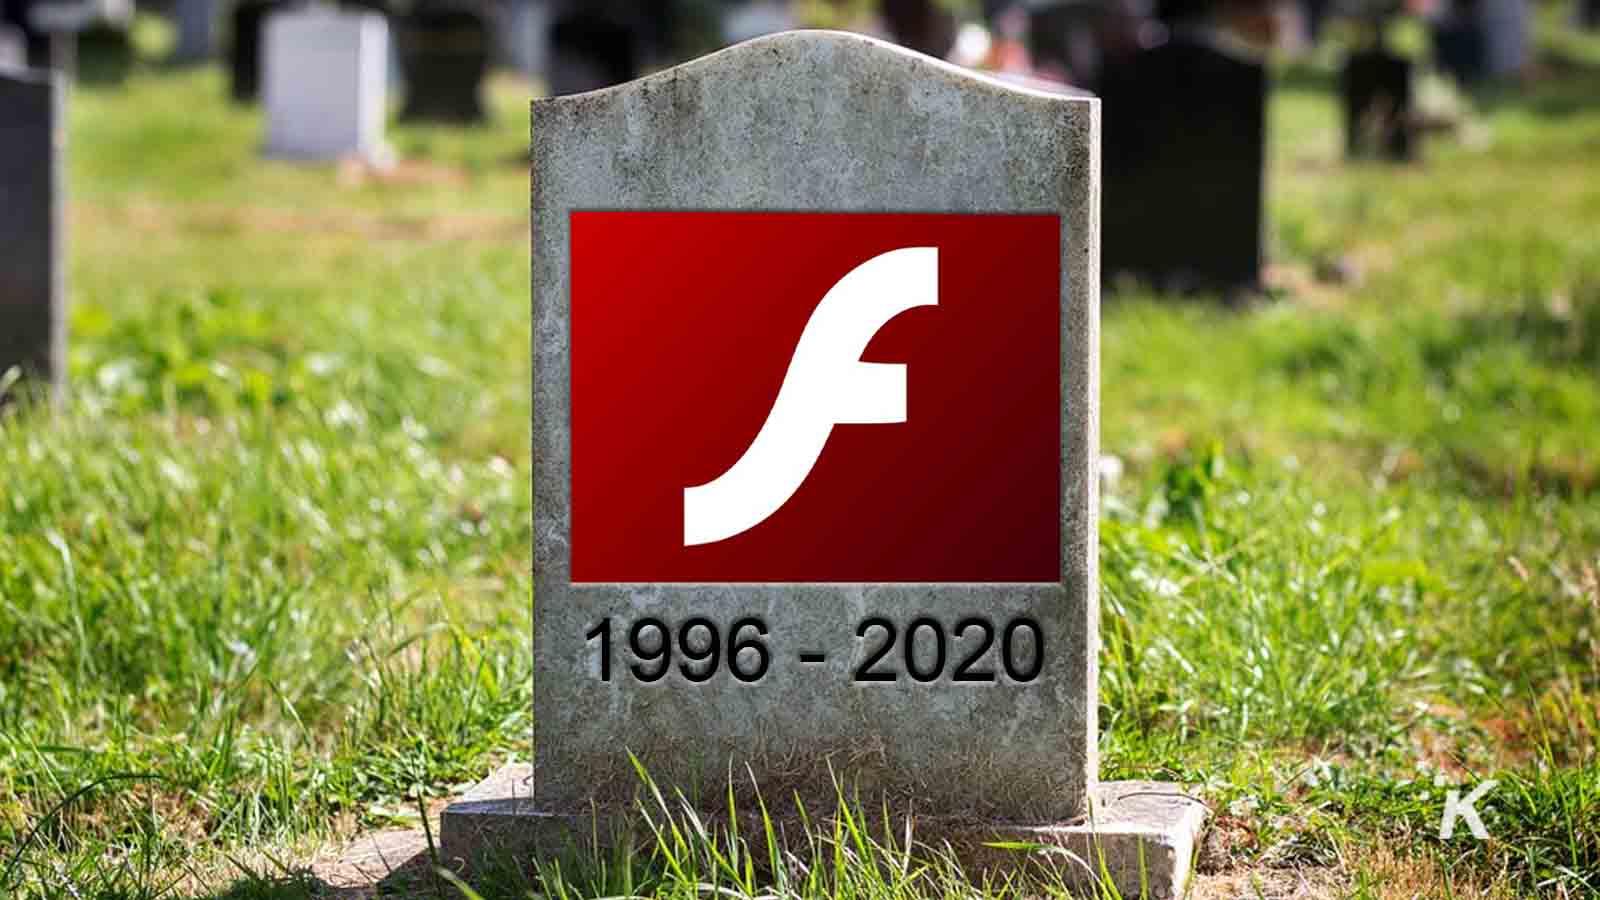 How to play Flash games after Adobe 'killed' them forever in 2020 - Times  of India